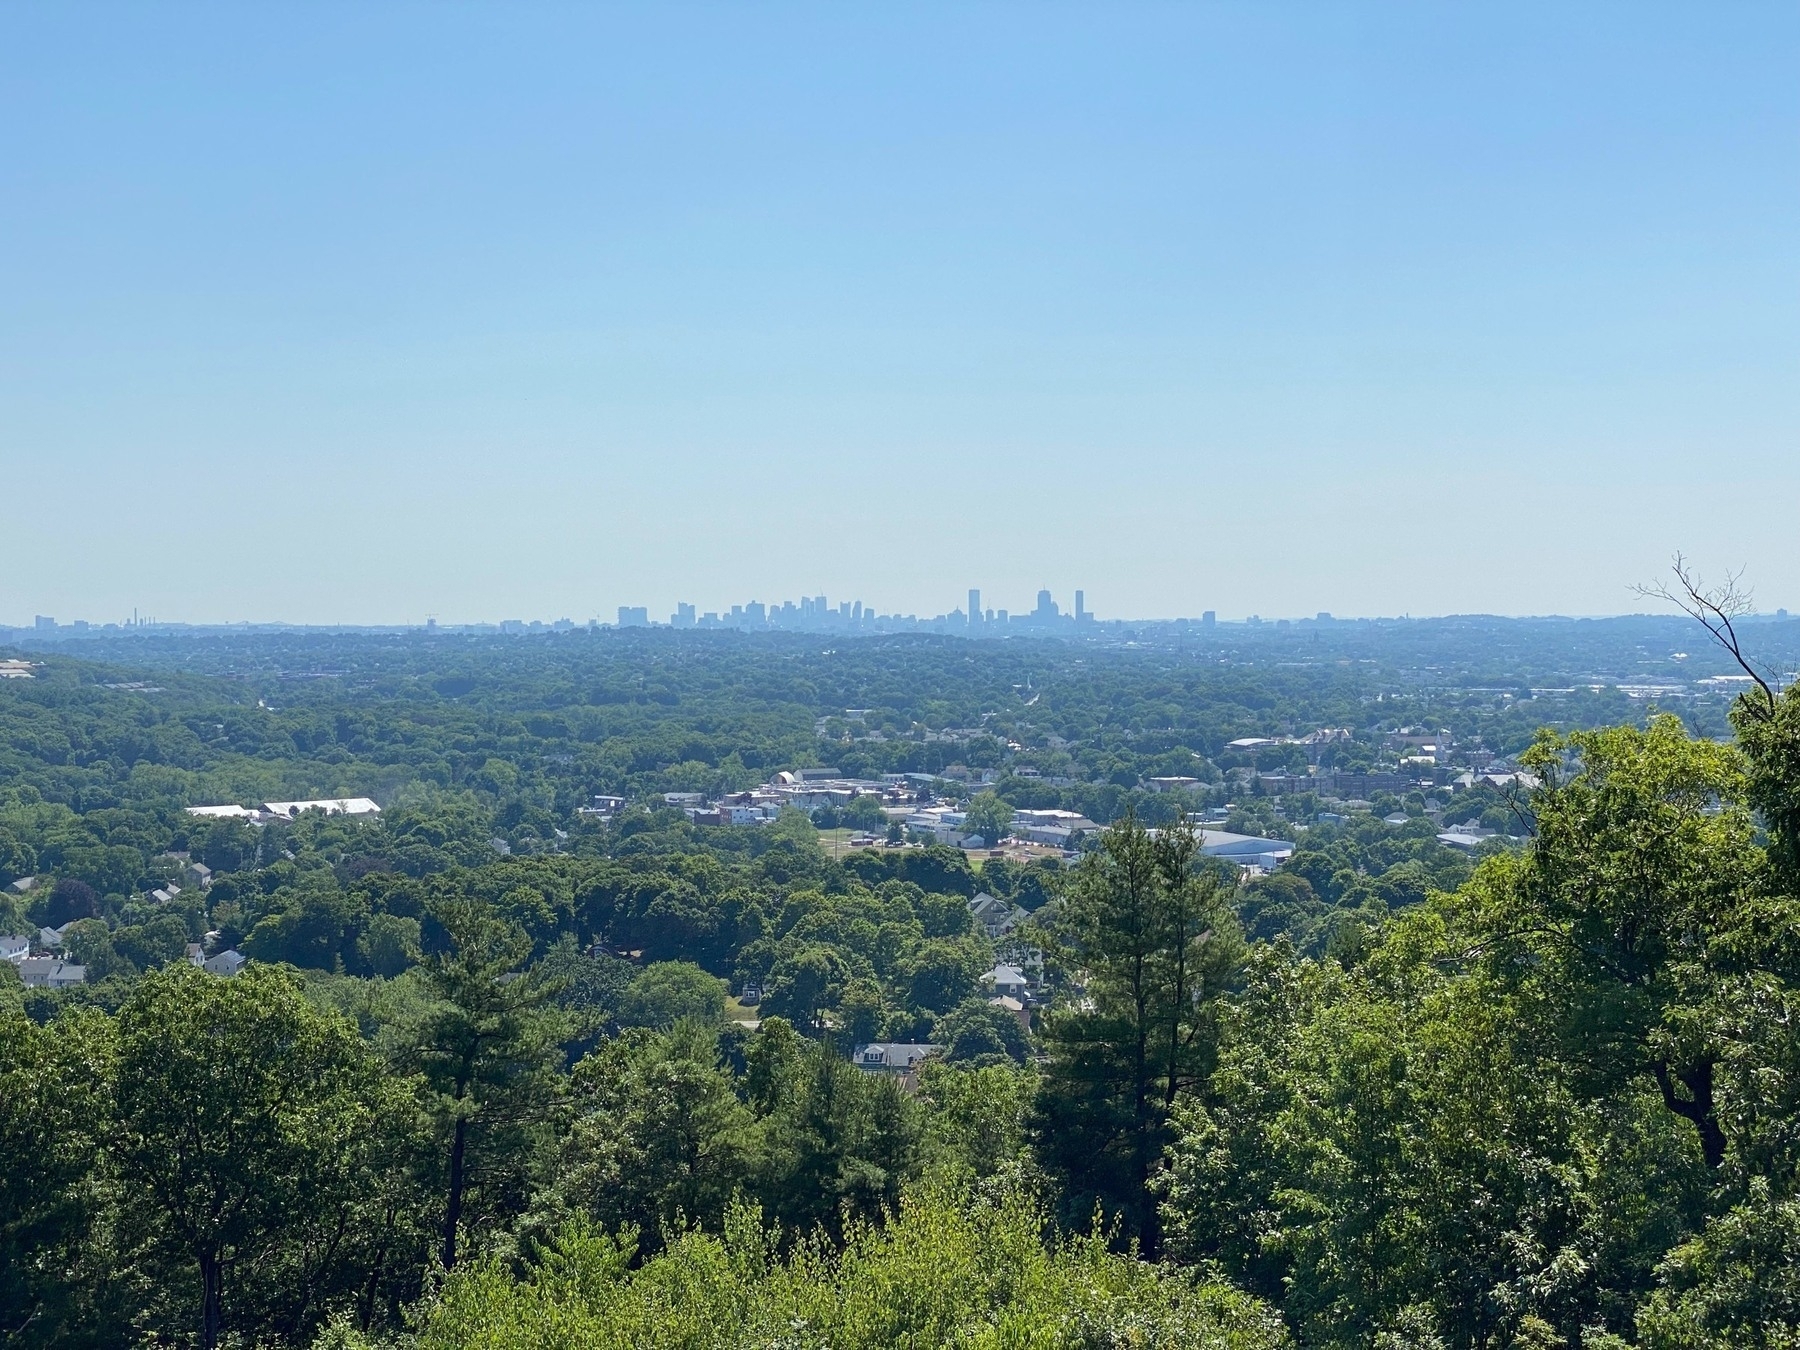 View of Waltham from Prospect Hill with the Boston skyline in the distance.